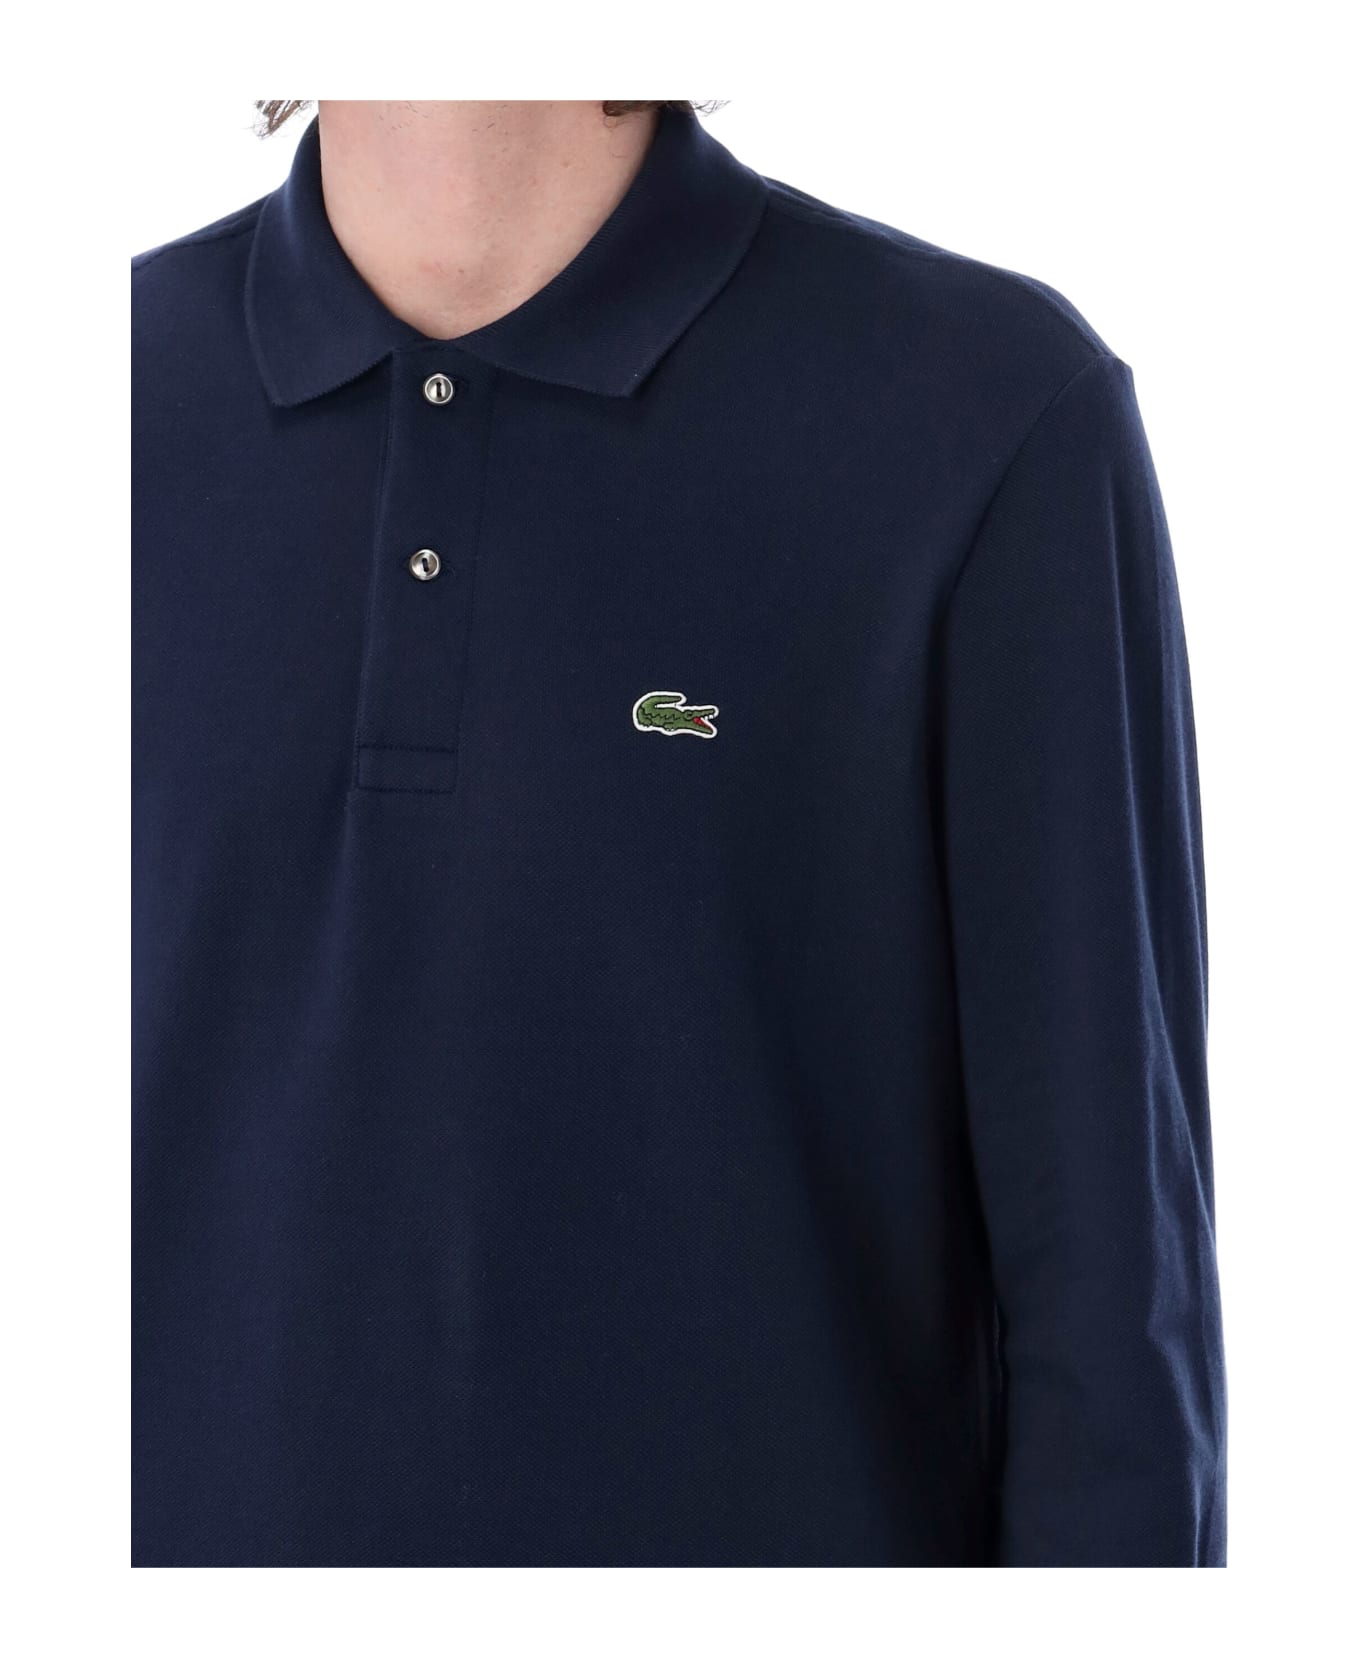 Lacoste Classic Fit L/s Polo Shirt - MARINE ポロシャツ